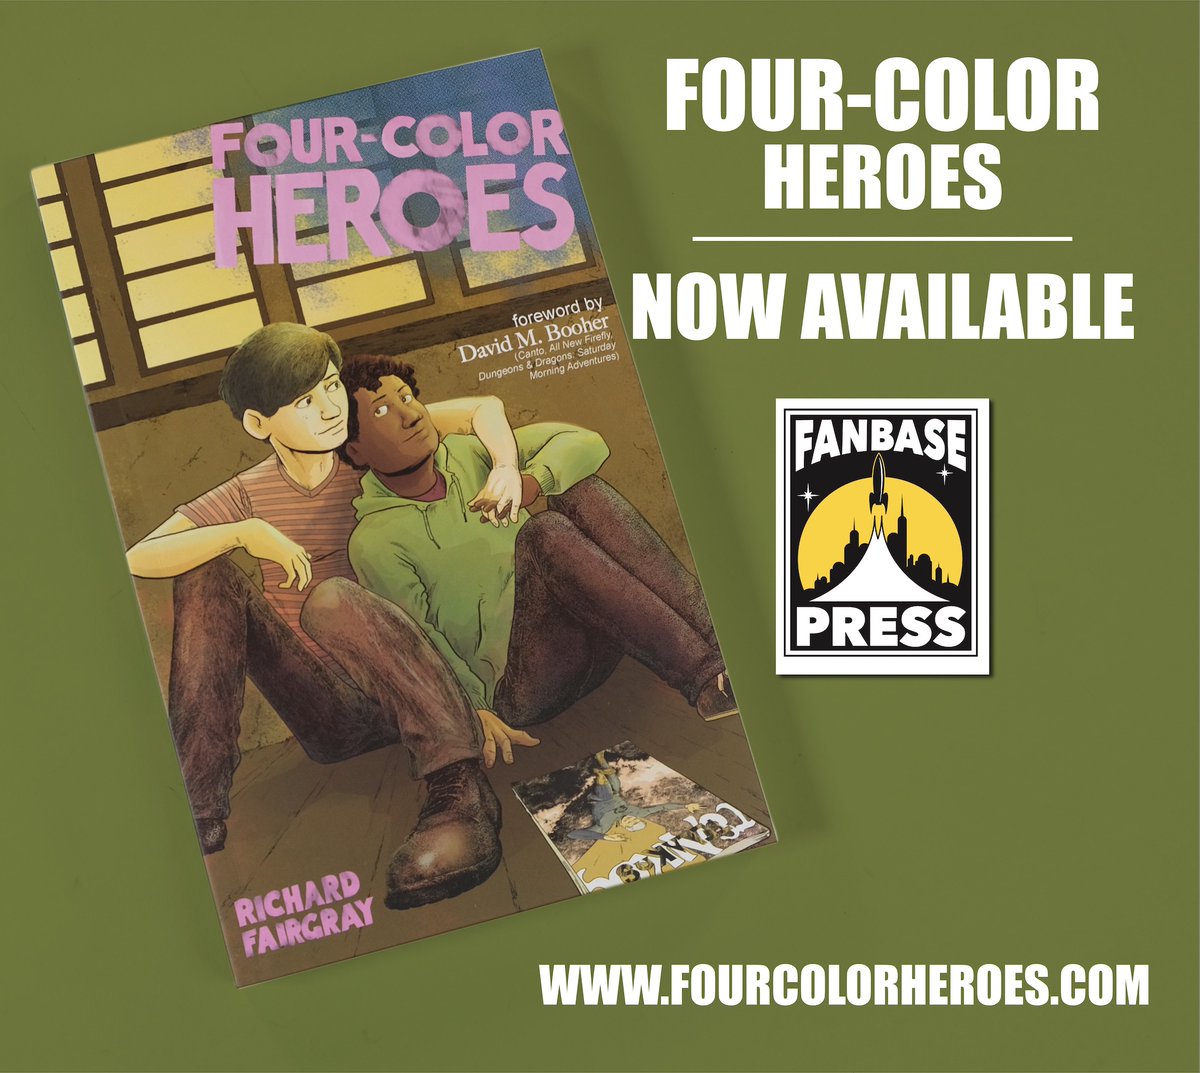 The #GLAAD-winning coming-of-age #GraphicNovel, @4ColorHeroesGN, by @RichardFairgray is available from @Fanbase_Press! 2 boys from wildly different worlds find love & self-discovery thru #comics | Feat. @davidbooher & @ArkhamAsylumDoc #LGBTQIA+ fanbasepress.ecrater.com/p/42007307/fou…